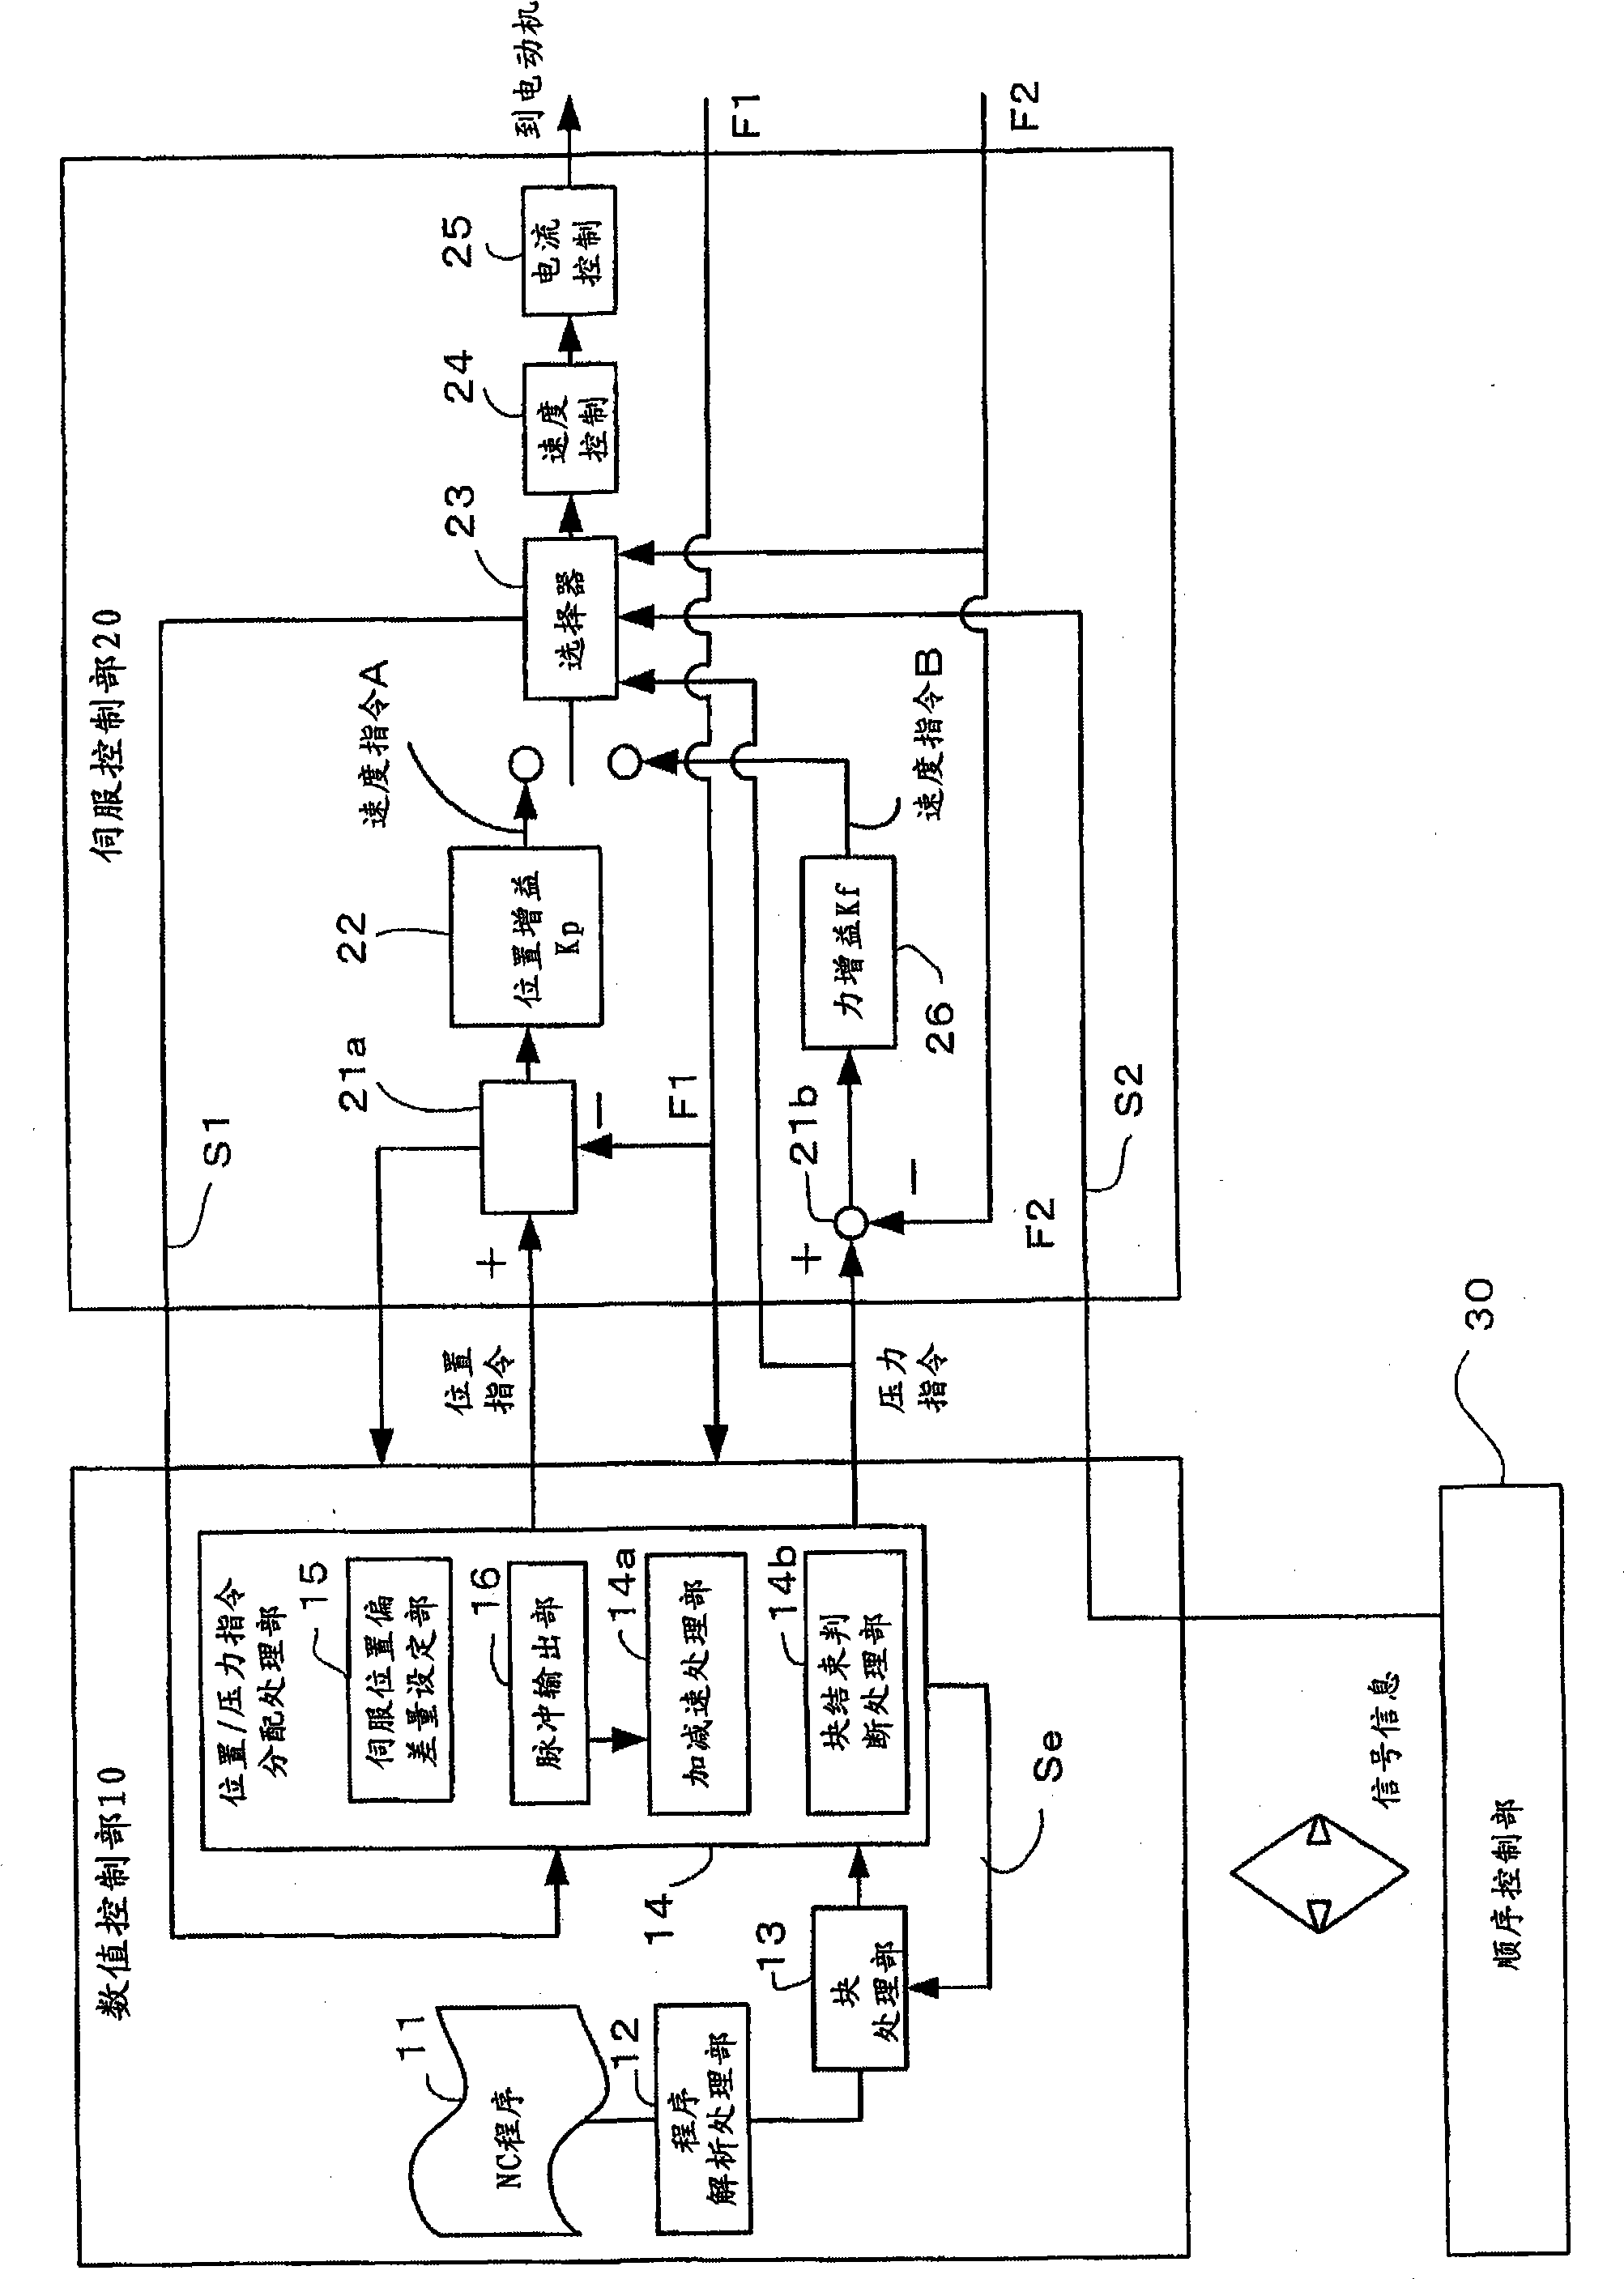 Numerical controller having function to switch between pressure control and position control